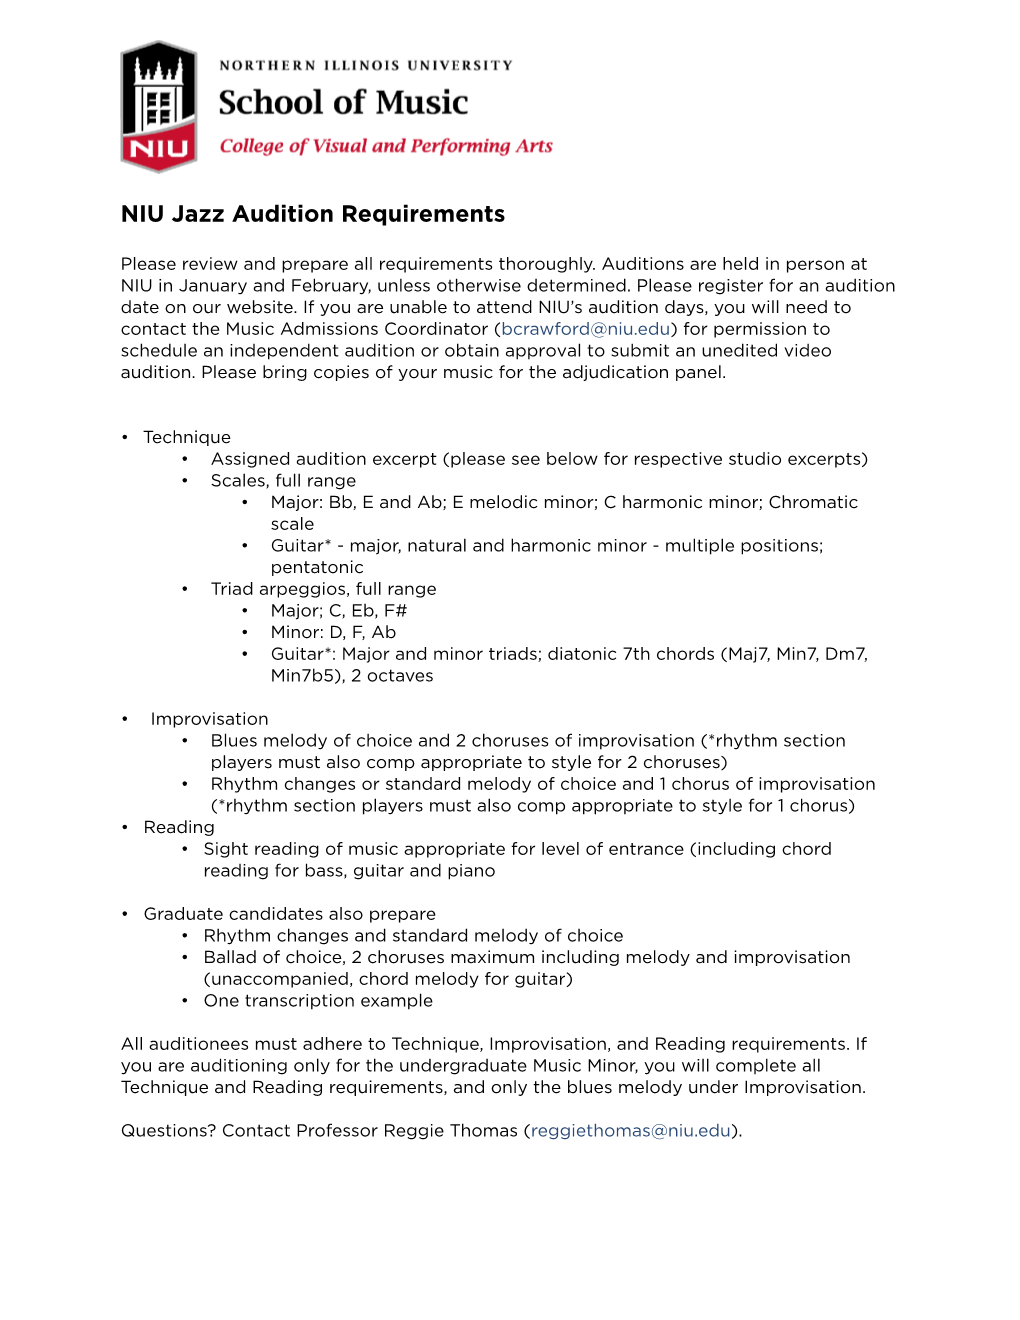 NIU Jazz Audition Requirements